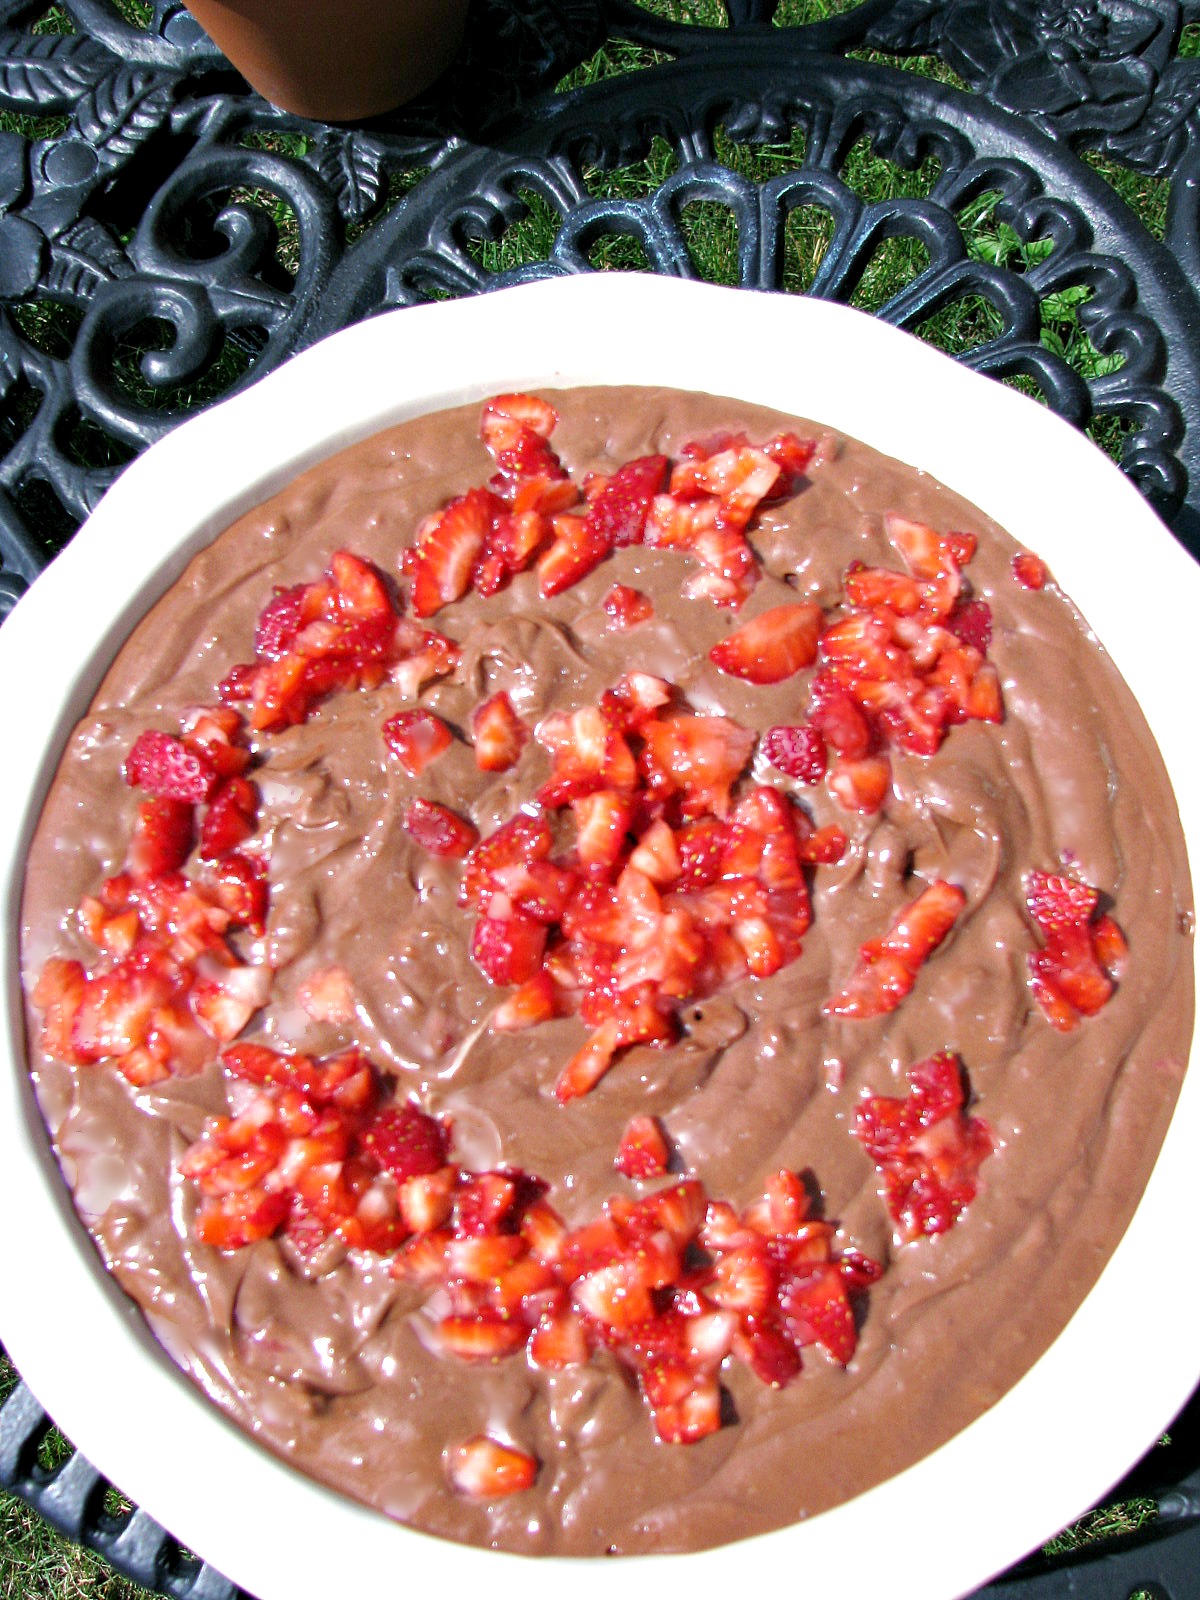 Creamy, chocolaty whipped Nutella dip with fresh strawberries! This dip is fabulous with cinnamon sugar pita chips, fresh apple slices, and more!